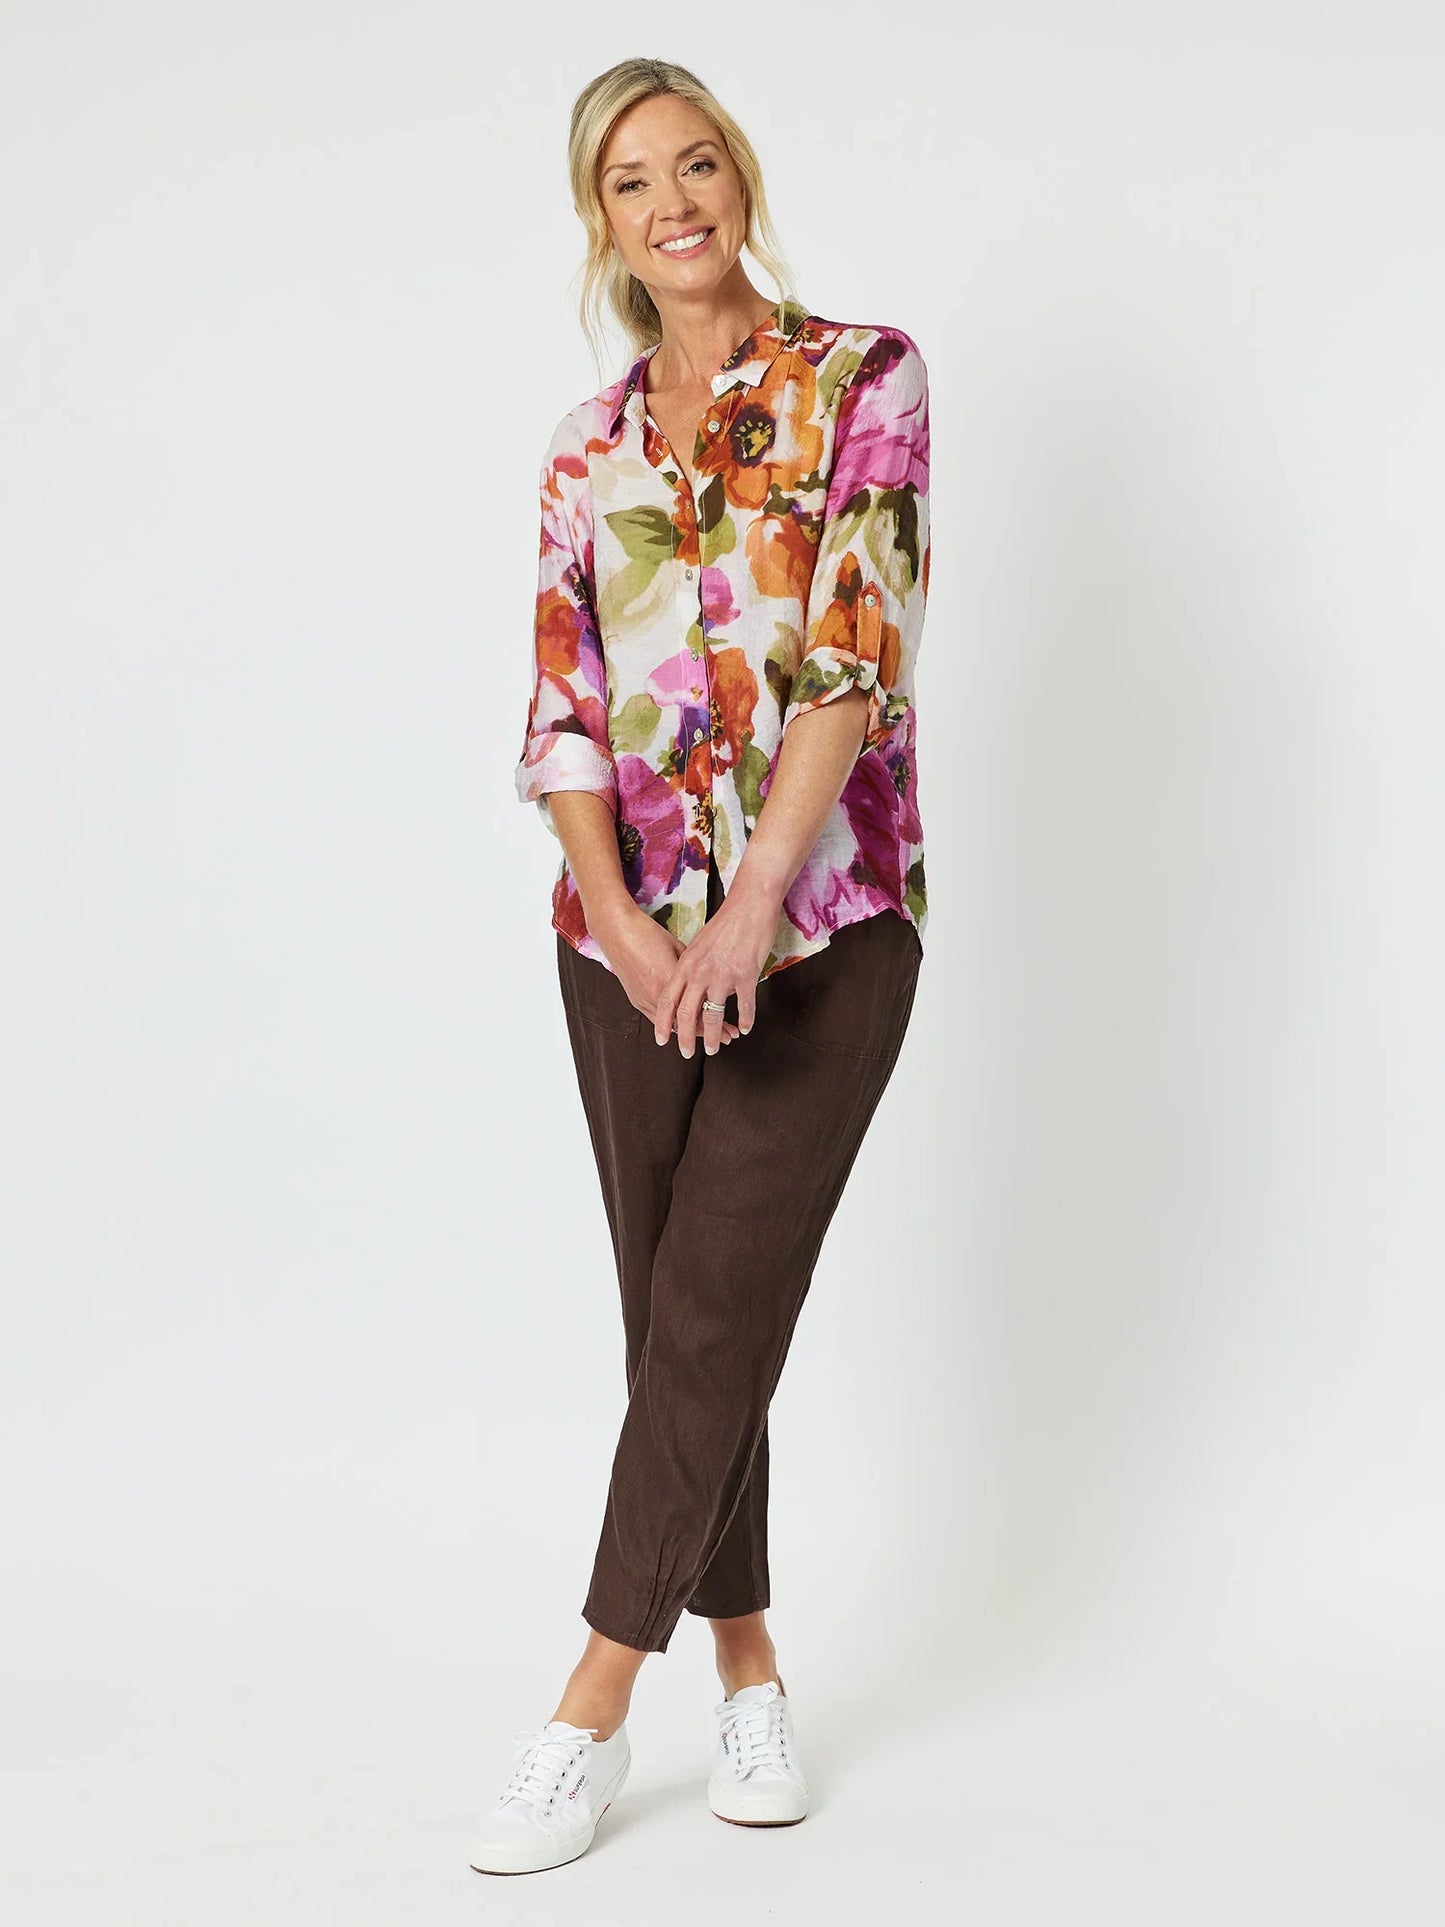 Maui Floral Shirt in Berry